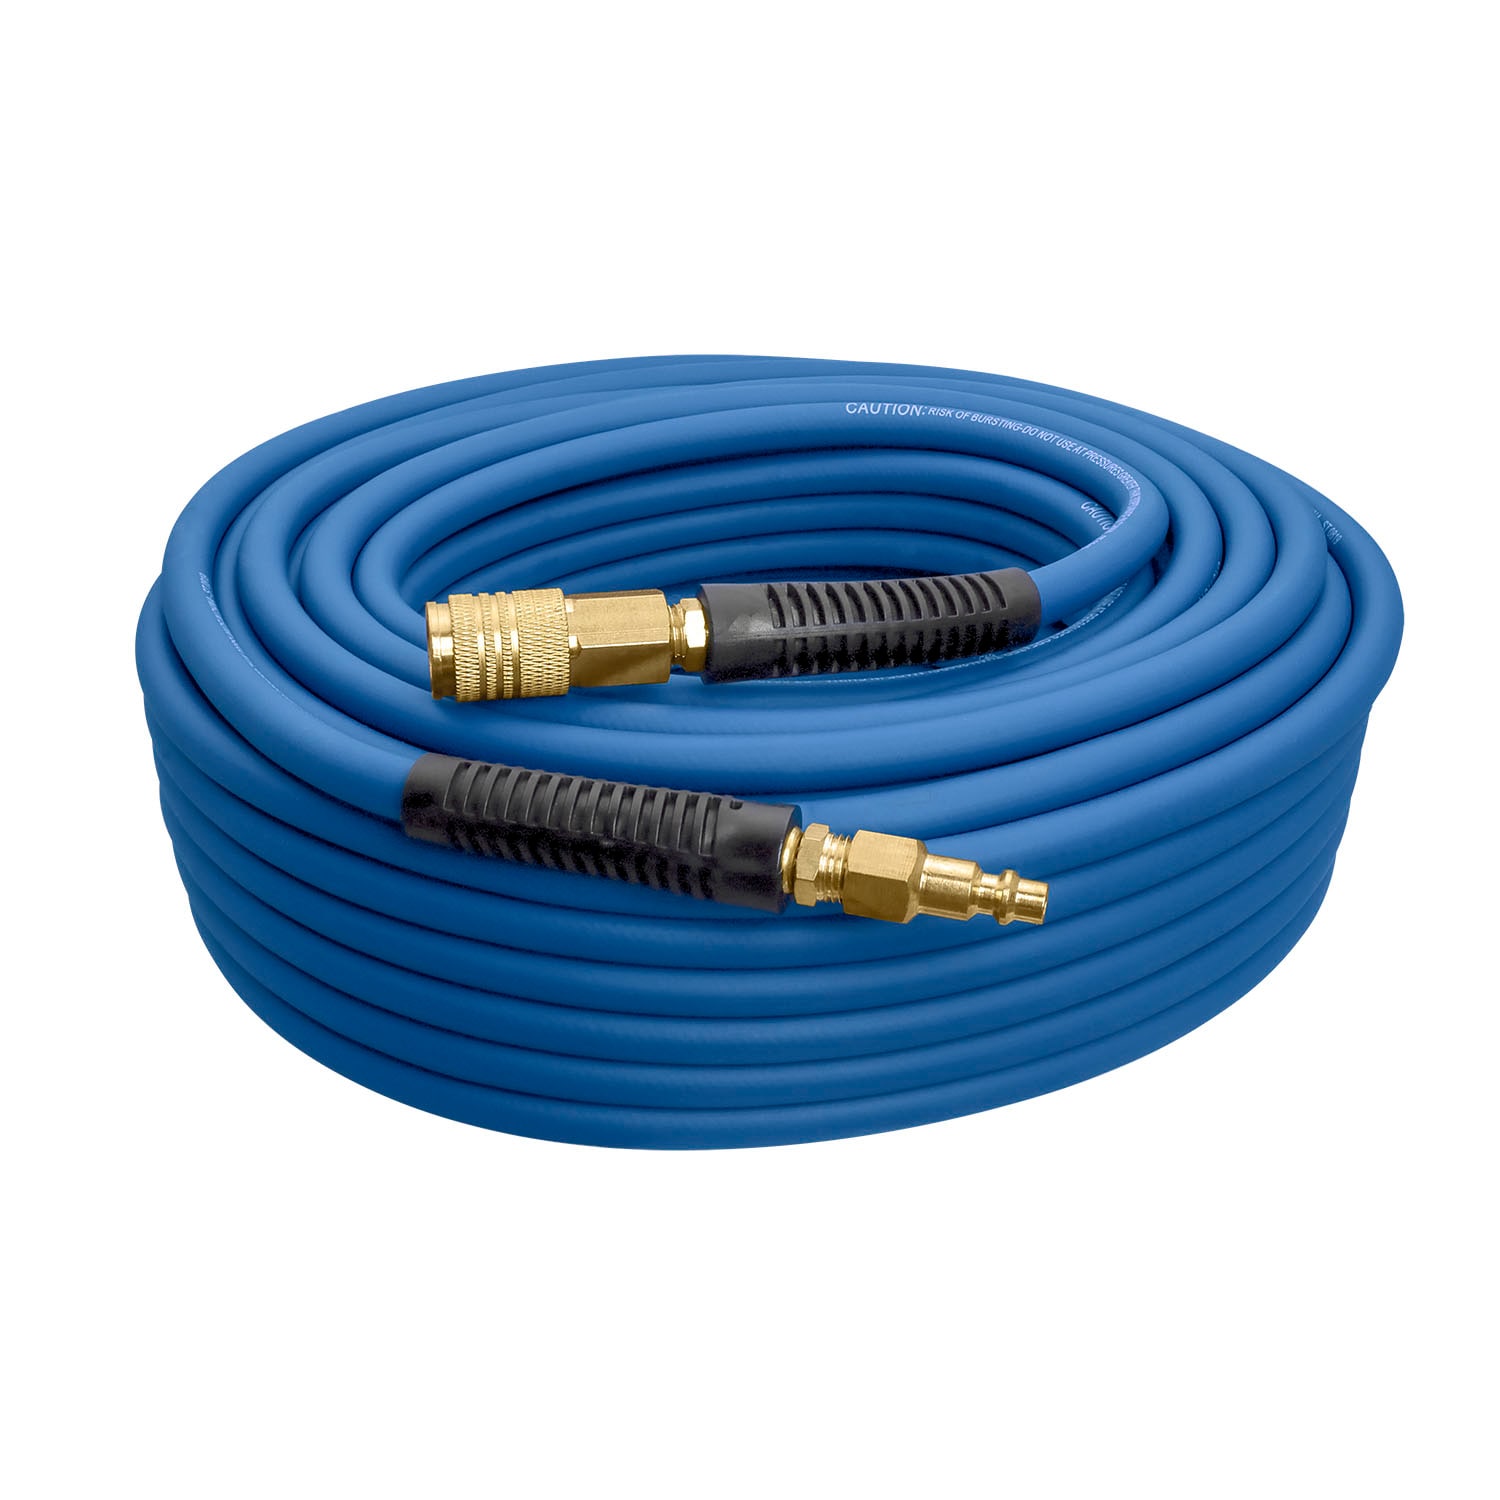 Rubber Hybrid Air Hose with Fittings Lightweight Kink-Resistant Compressed Air Hose with Solid Brass Couplings Estwing E1450PVCR 1/4 x 50 PVC Blue and Yellow 